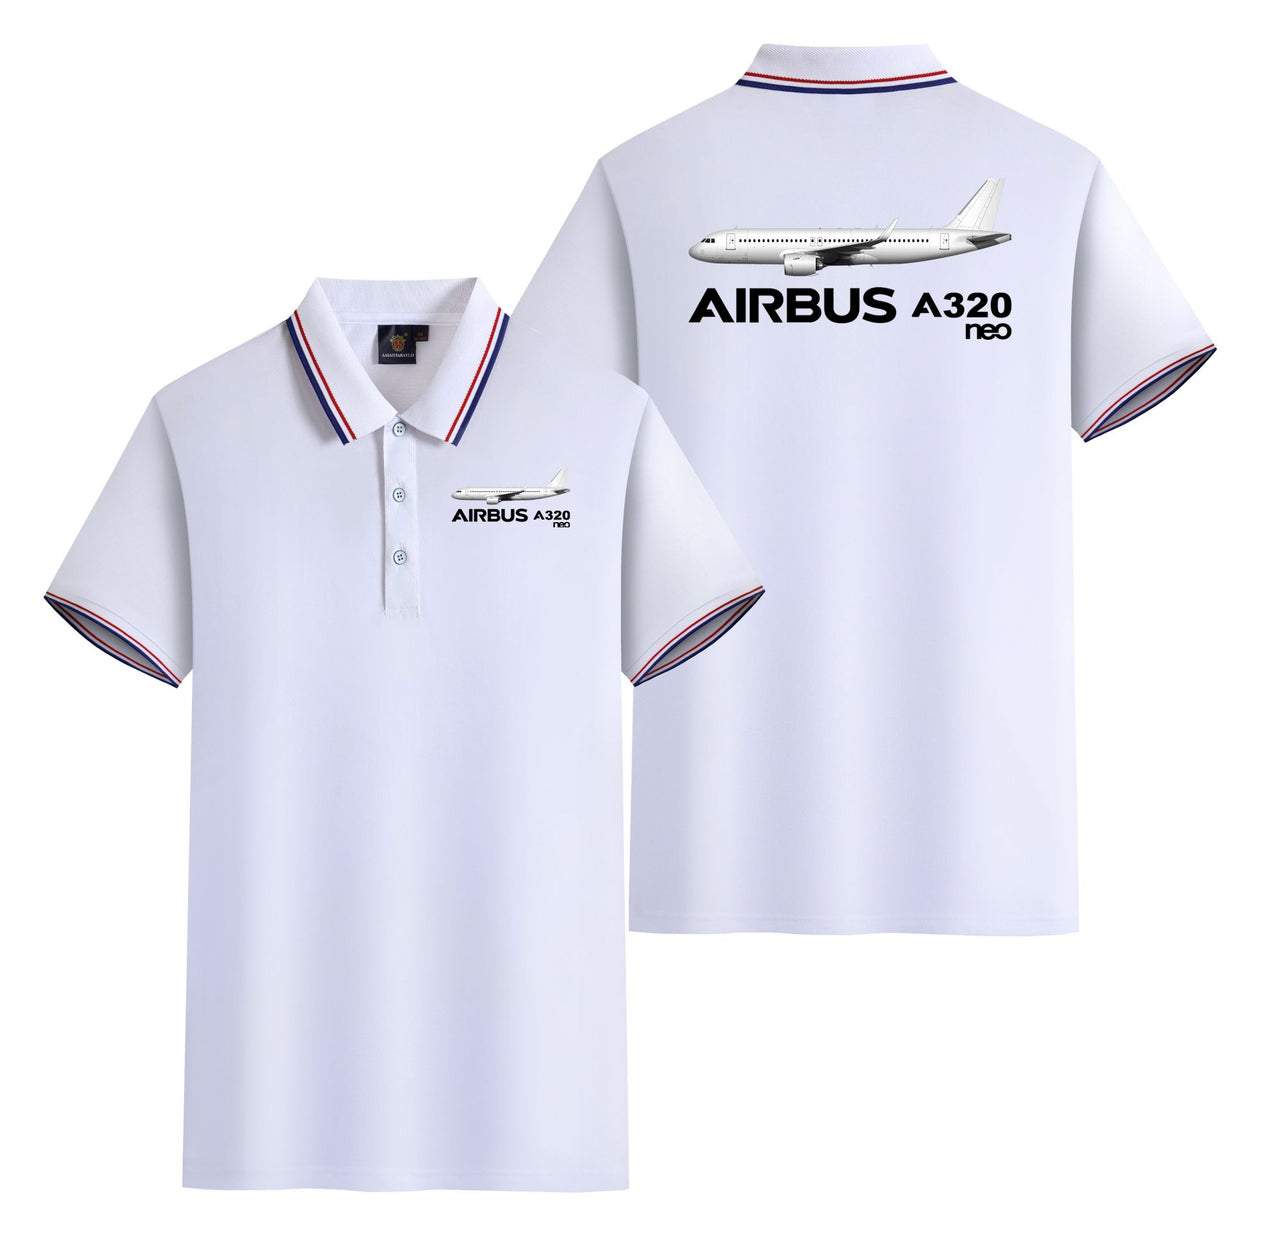 The Airbus A320Neo Designed Stylish Polo T-Shirts (Double-Side)